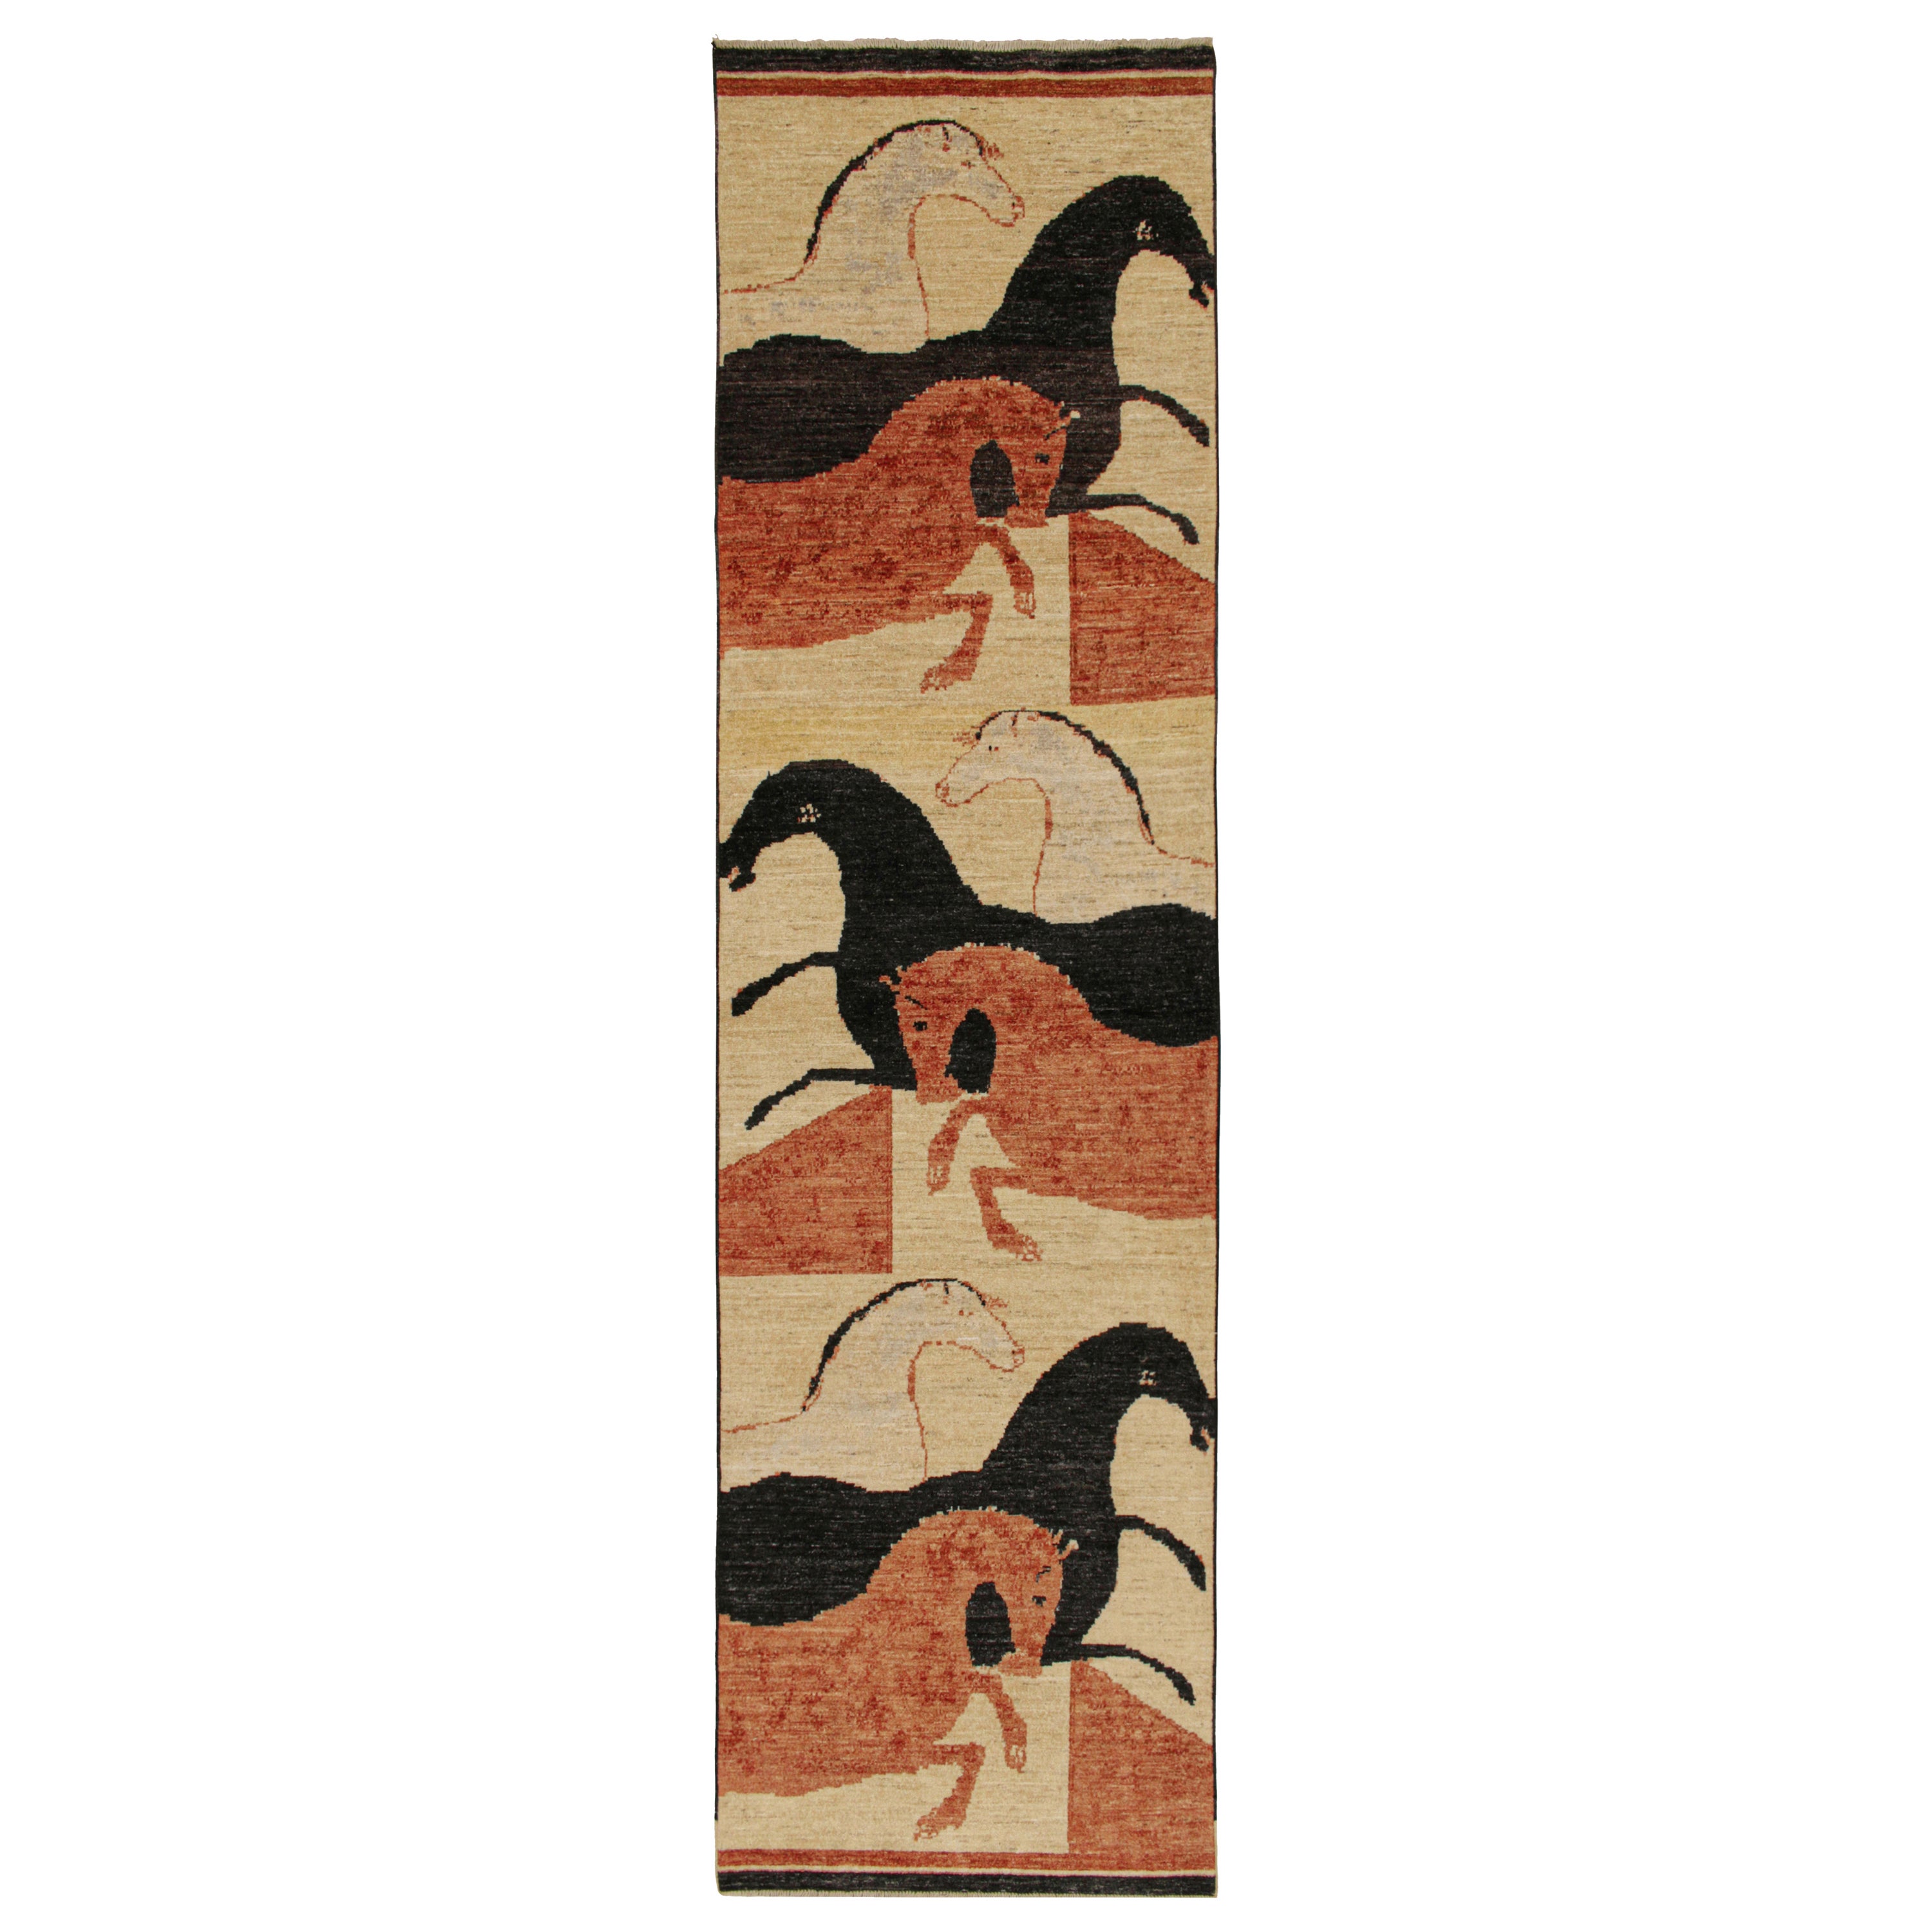 Rug & Kilim’s Persian Style Runner in Beige with Pink and Black Horse Pictorials